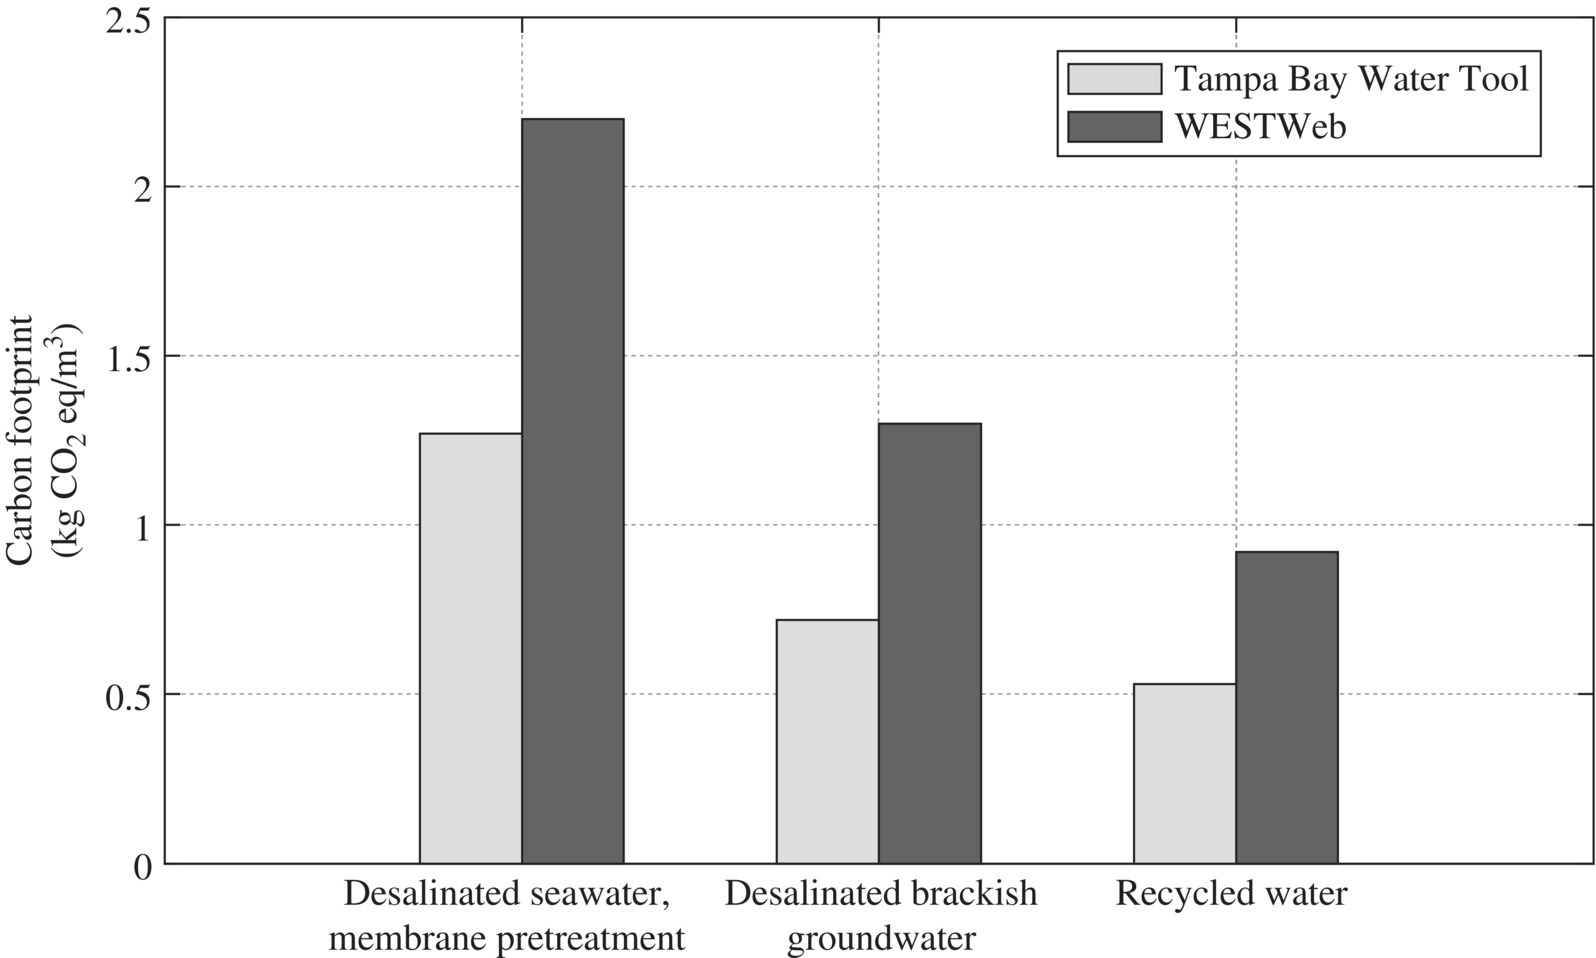 Comparison of carbon footprint estimate with 3 clustered bars for desalinated seawater, membrane pretreatment; desalinated brackish groundwater; and recycled water. Bars represent Tampa Bay Water Tool and WESTWeb.